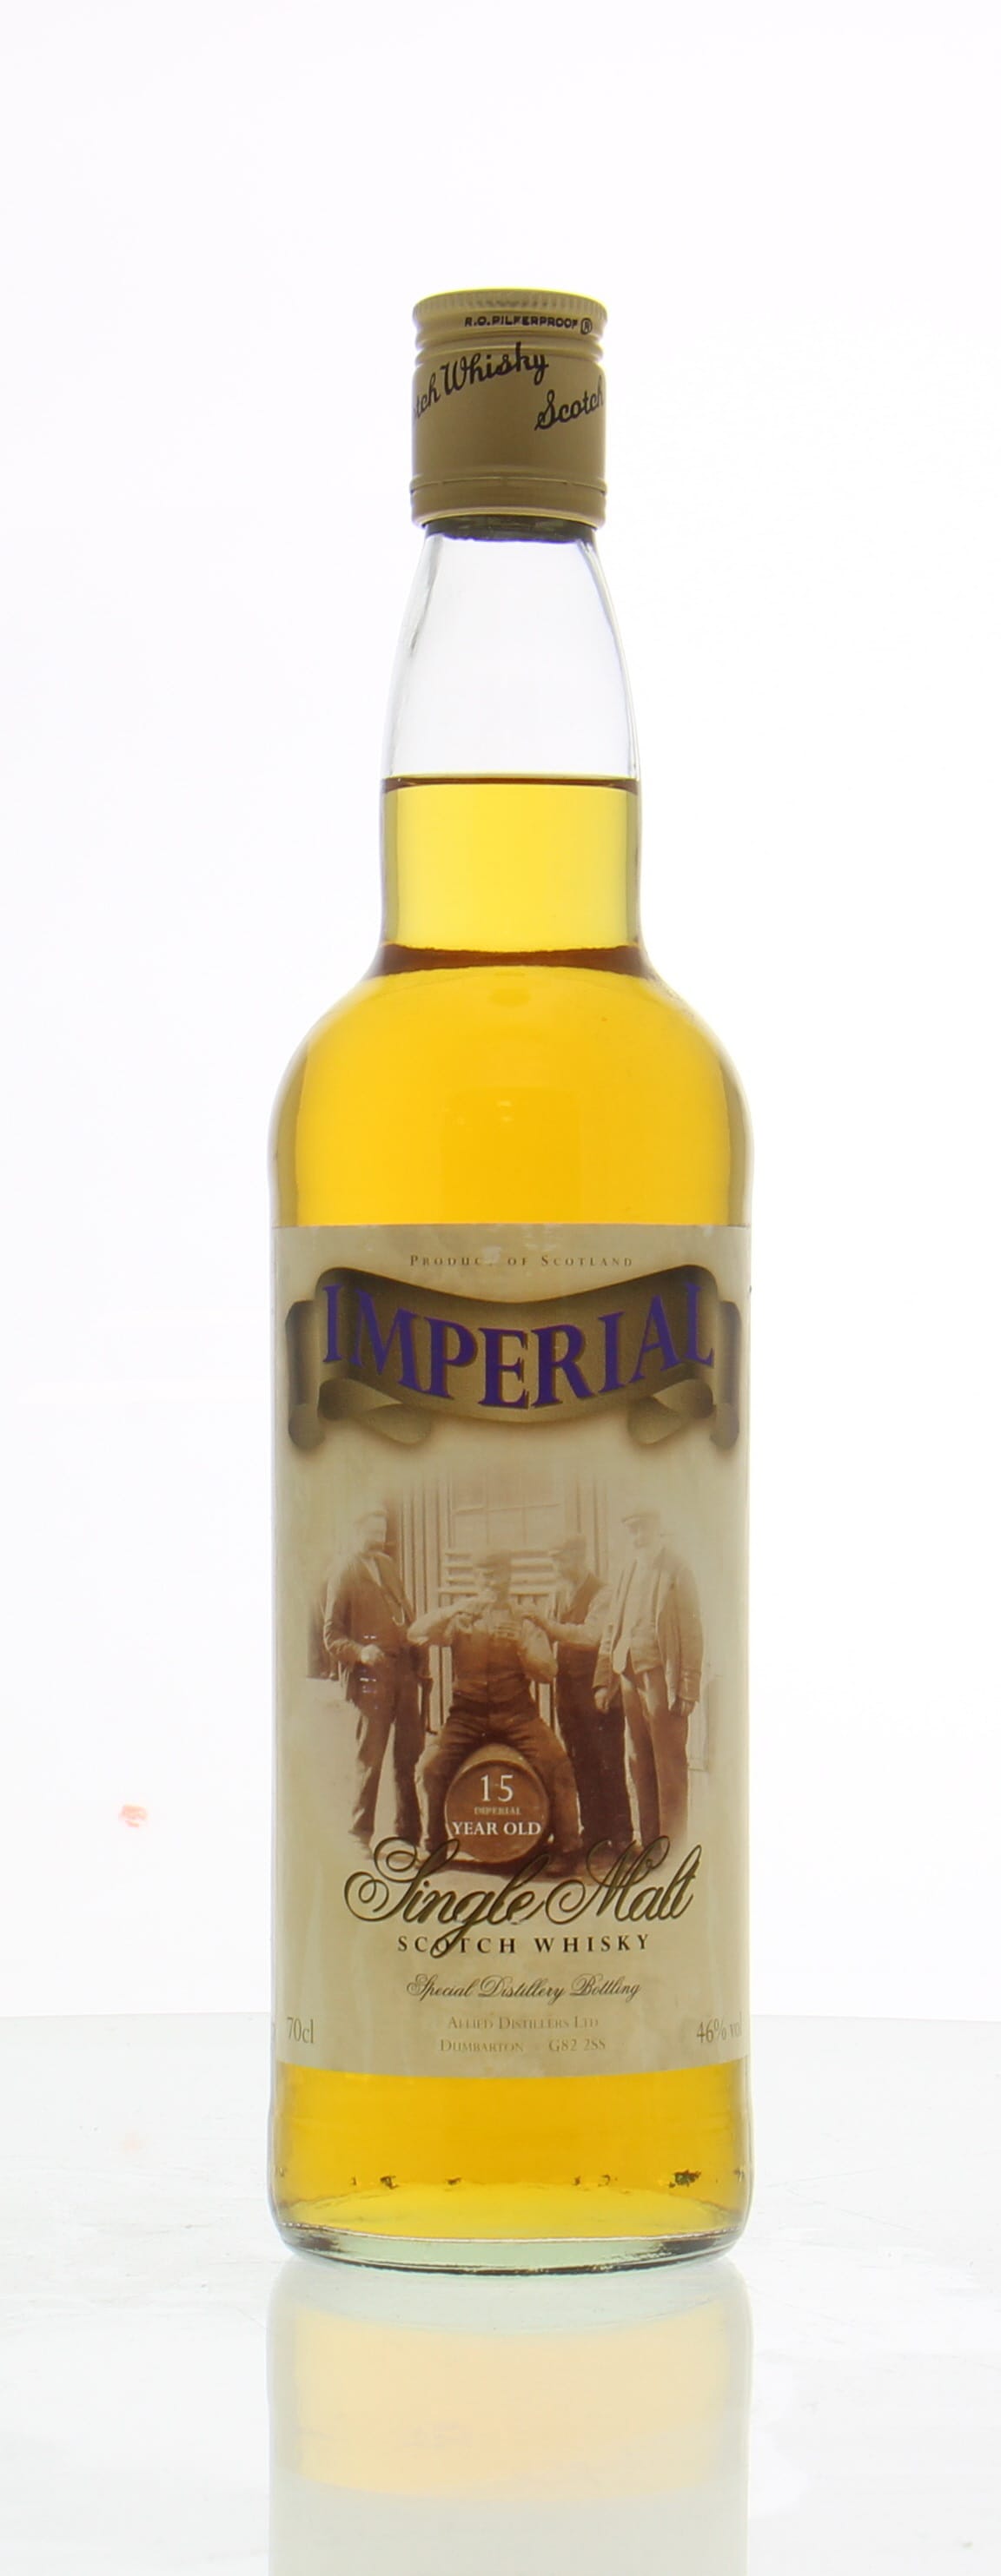 Imperial - 15 Years Old Special Distillery Bottling - Allied 46% NV NO OC